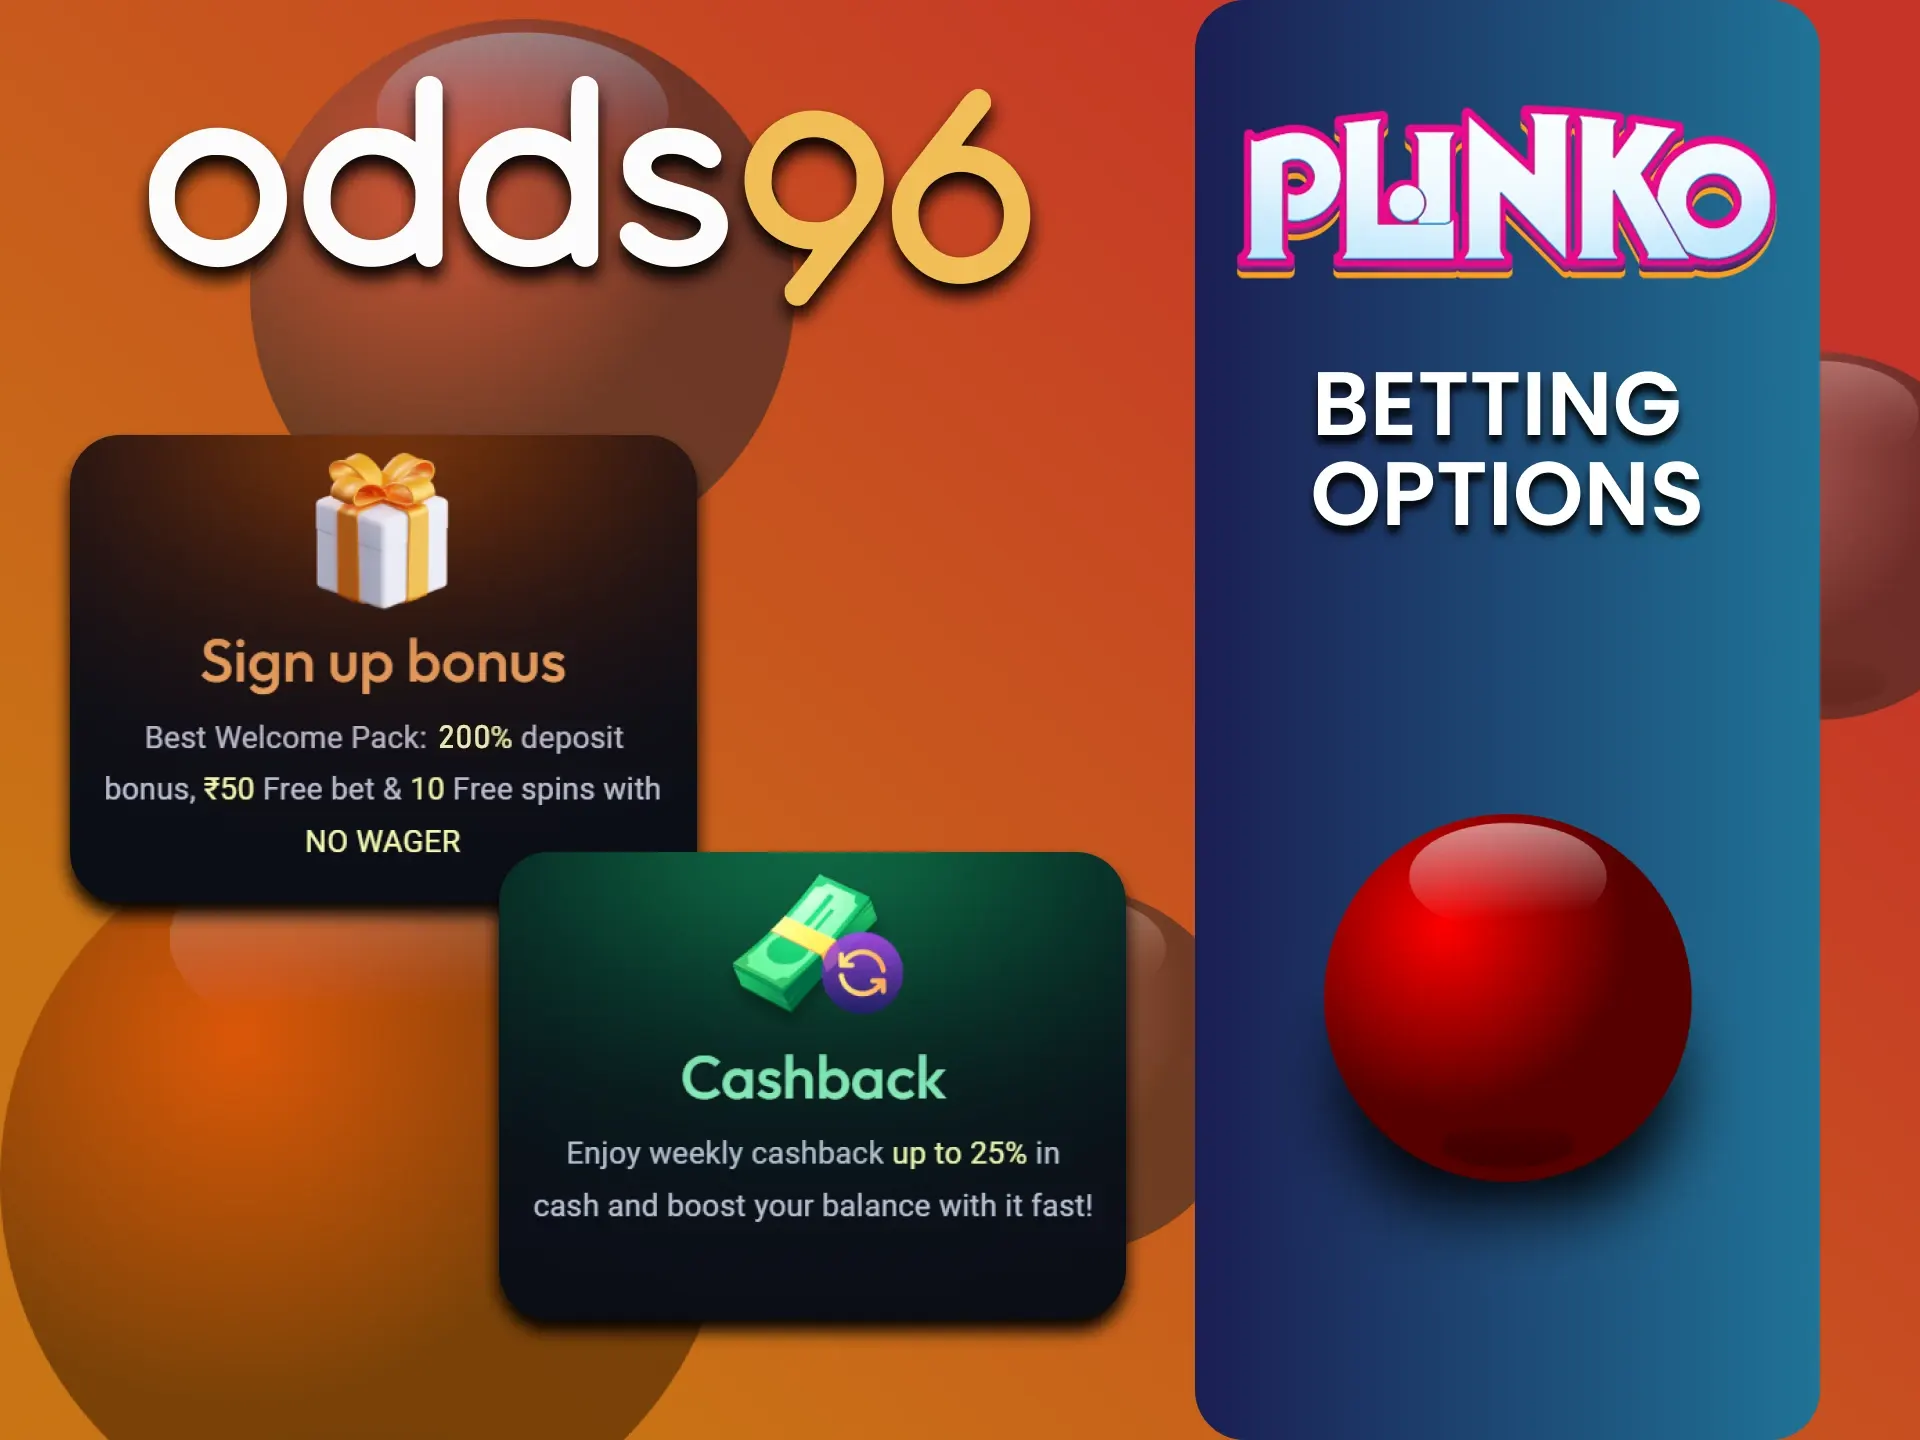 Get a bonus for playing Plinko from Odds96.